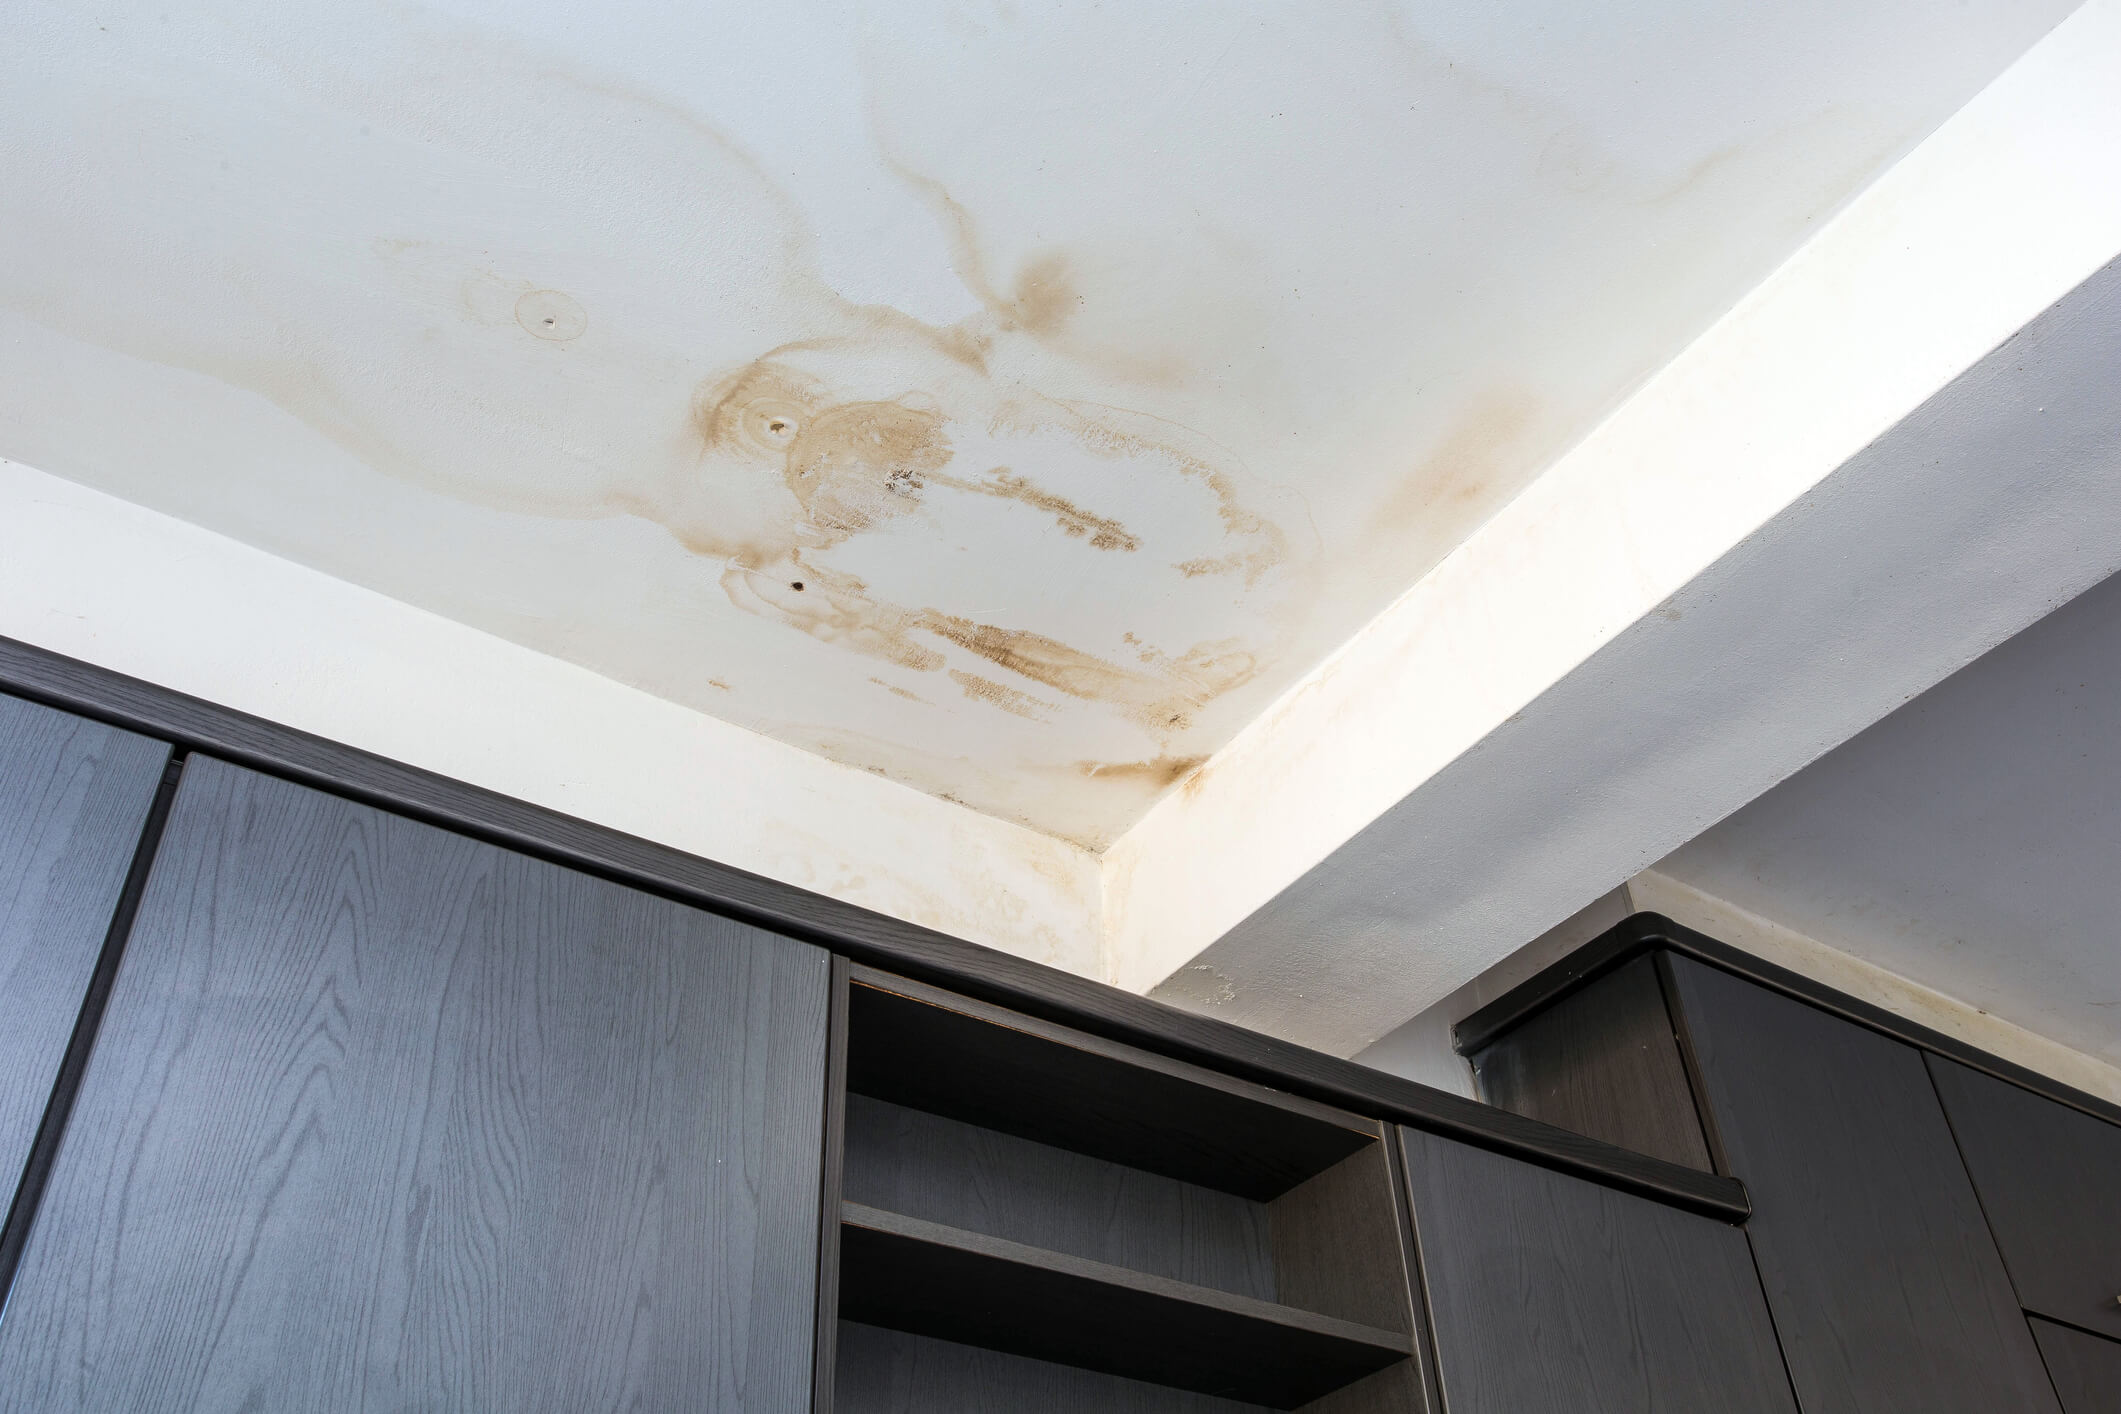 Water Damage From Your Hvac Equipment